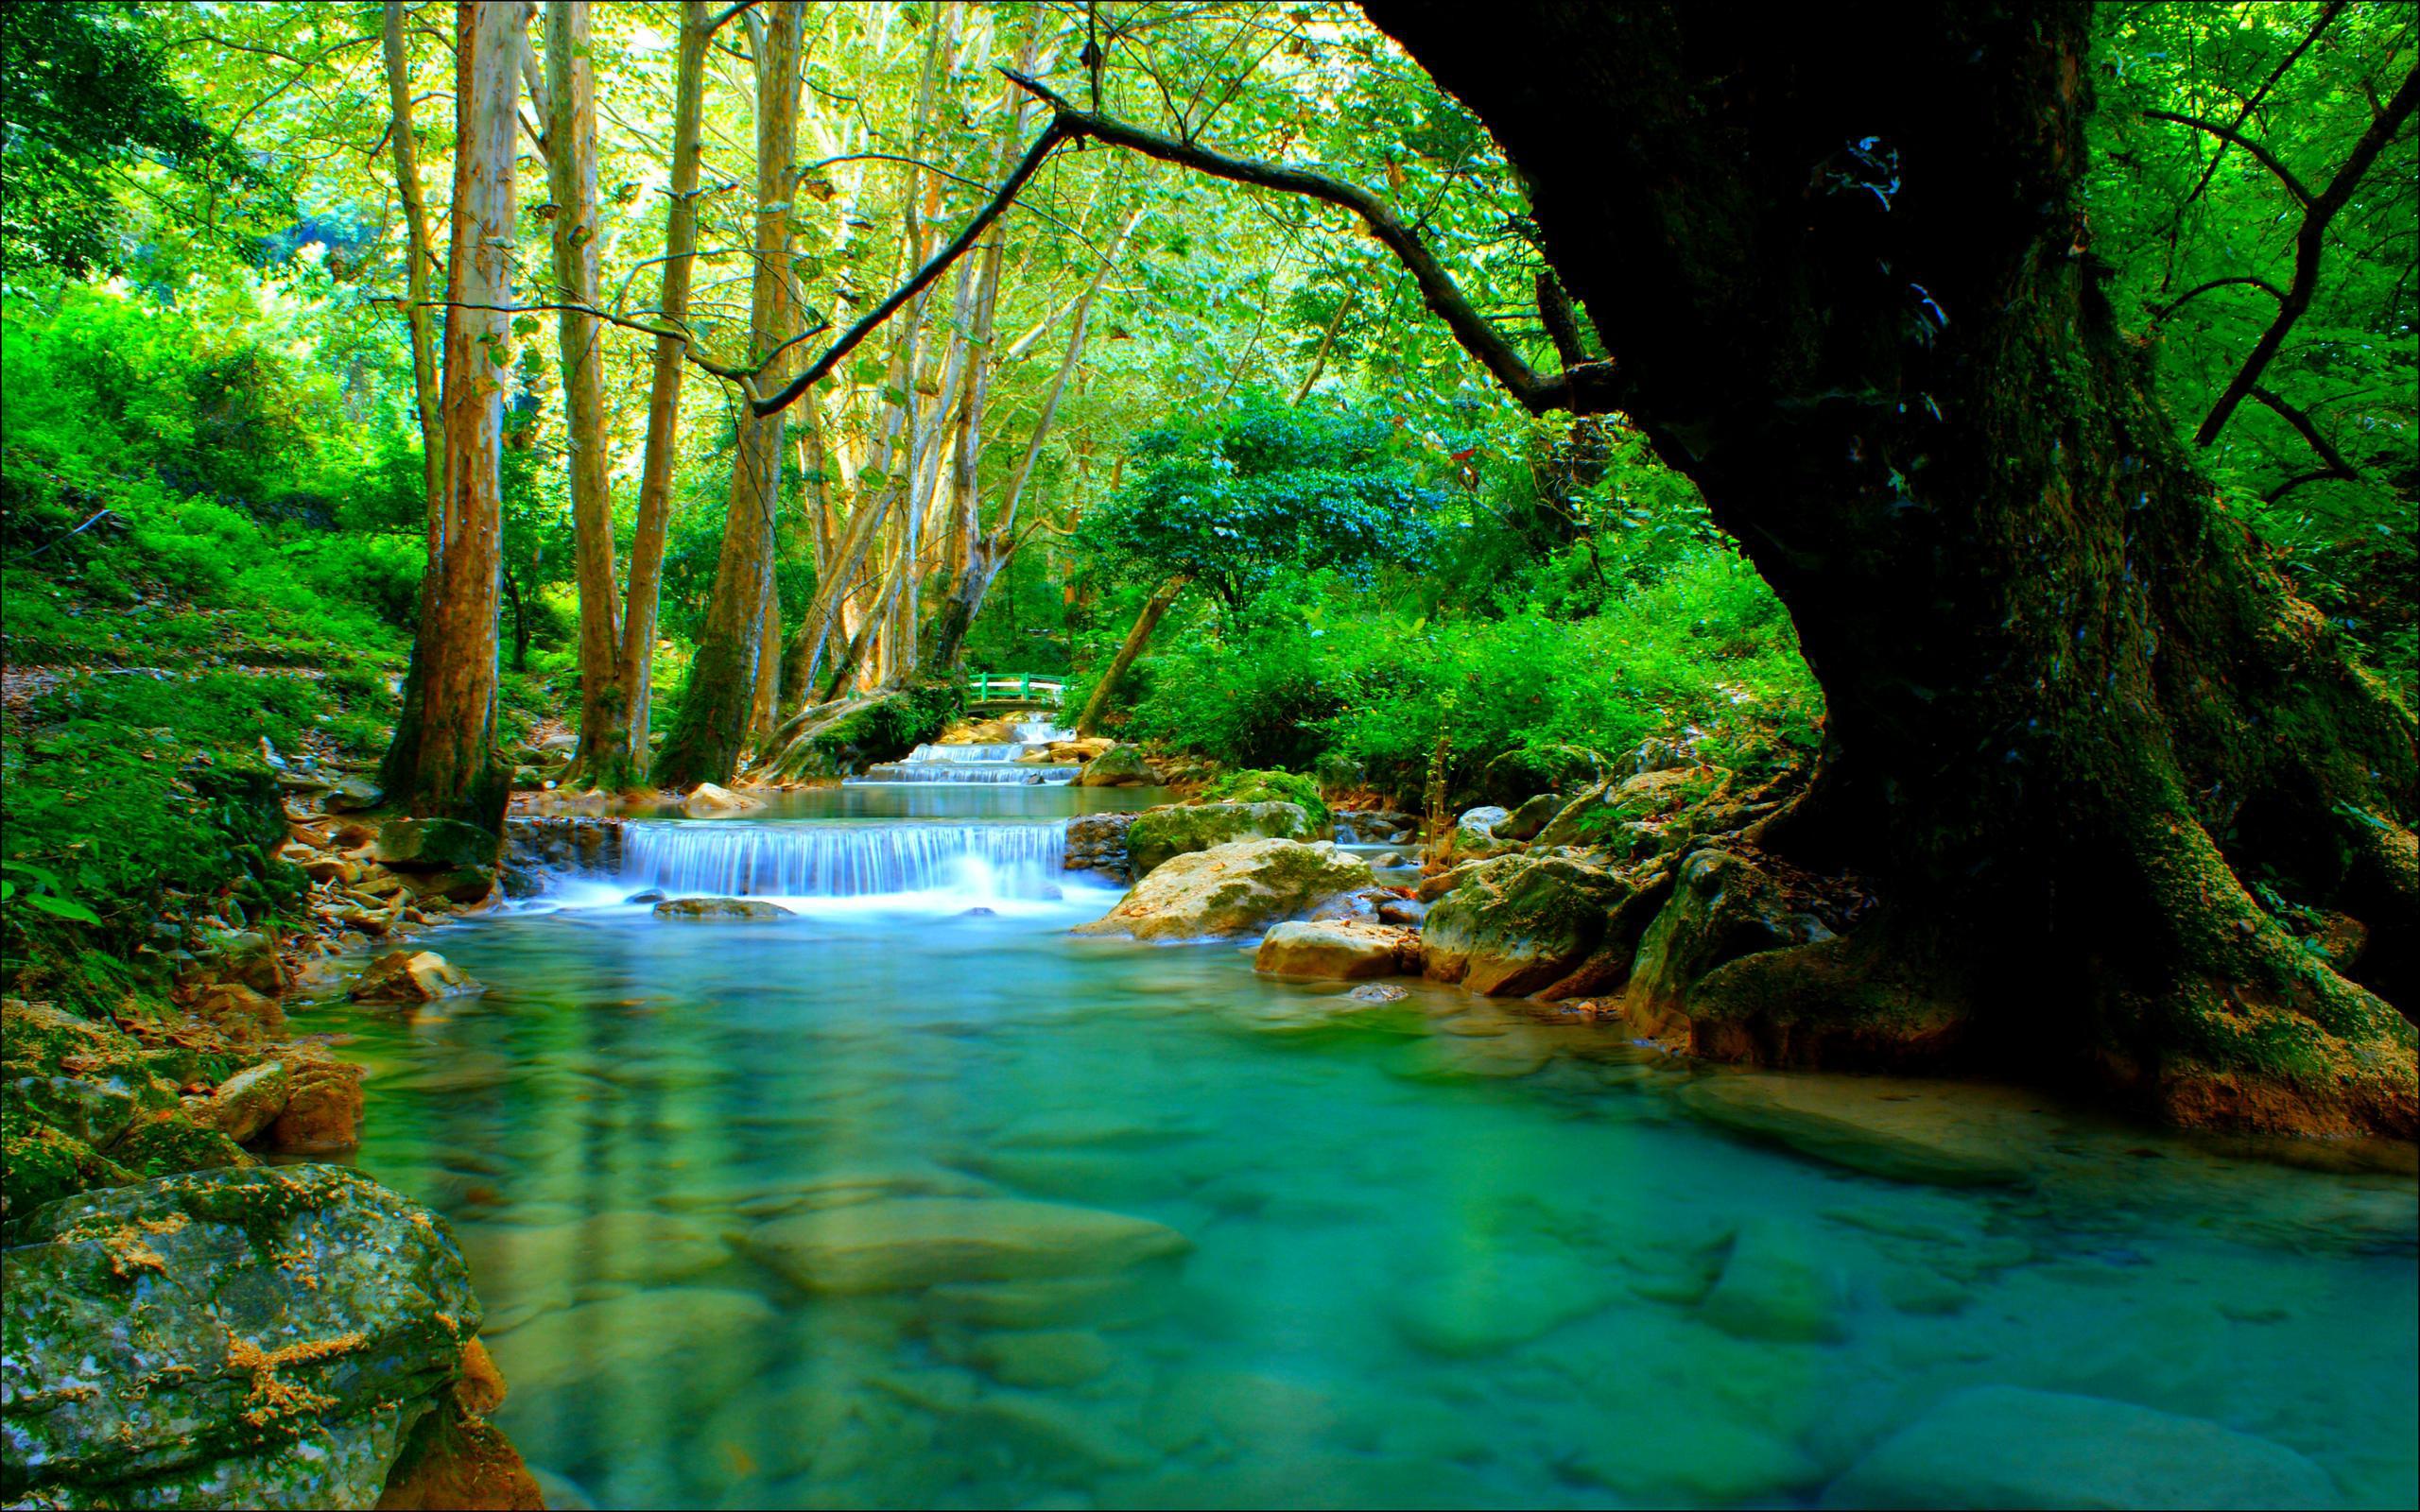 For mobile image, Forest river